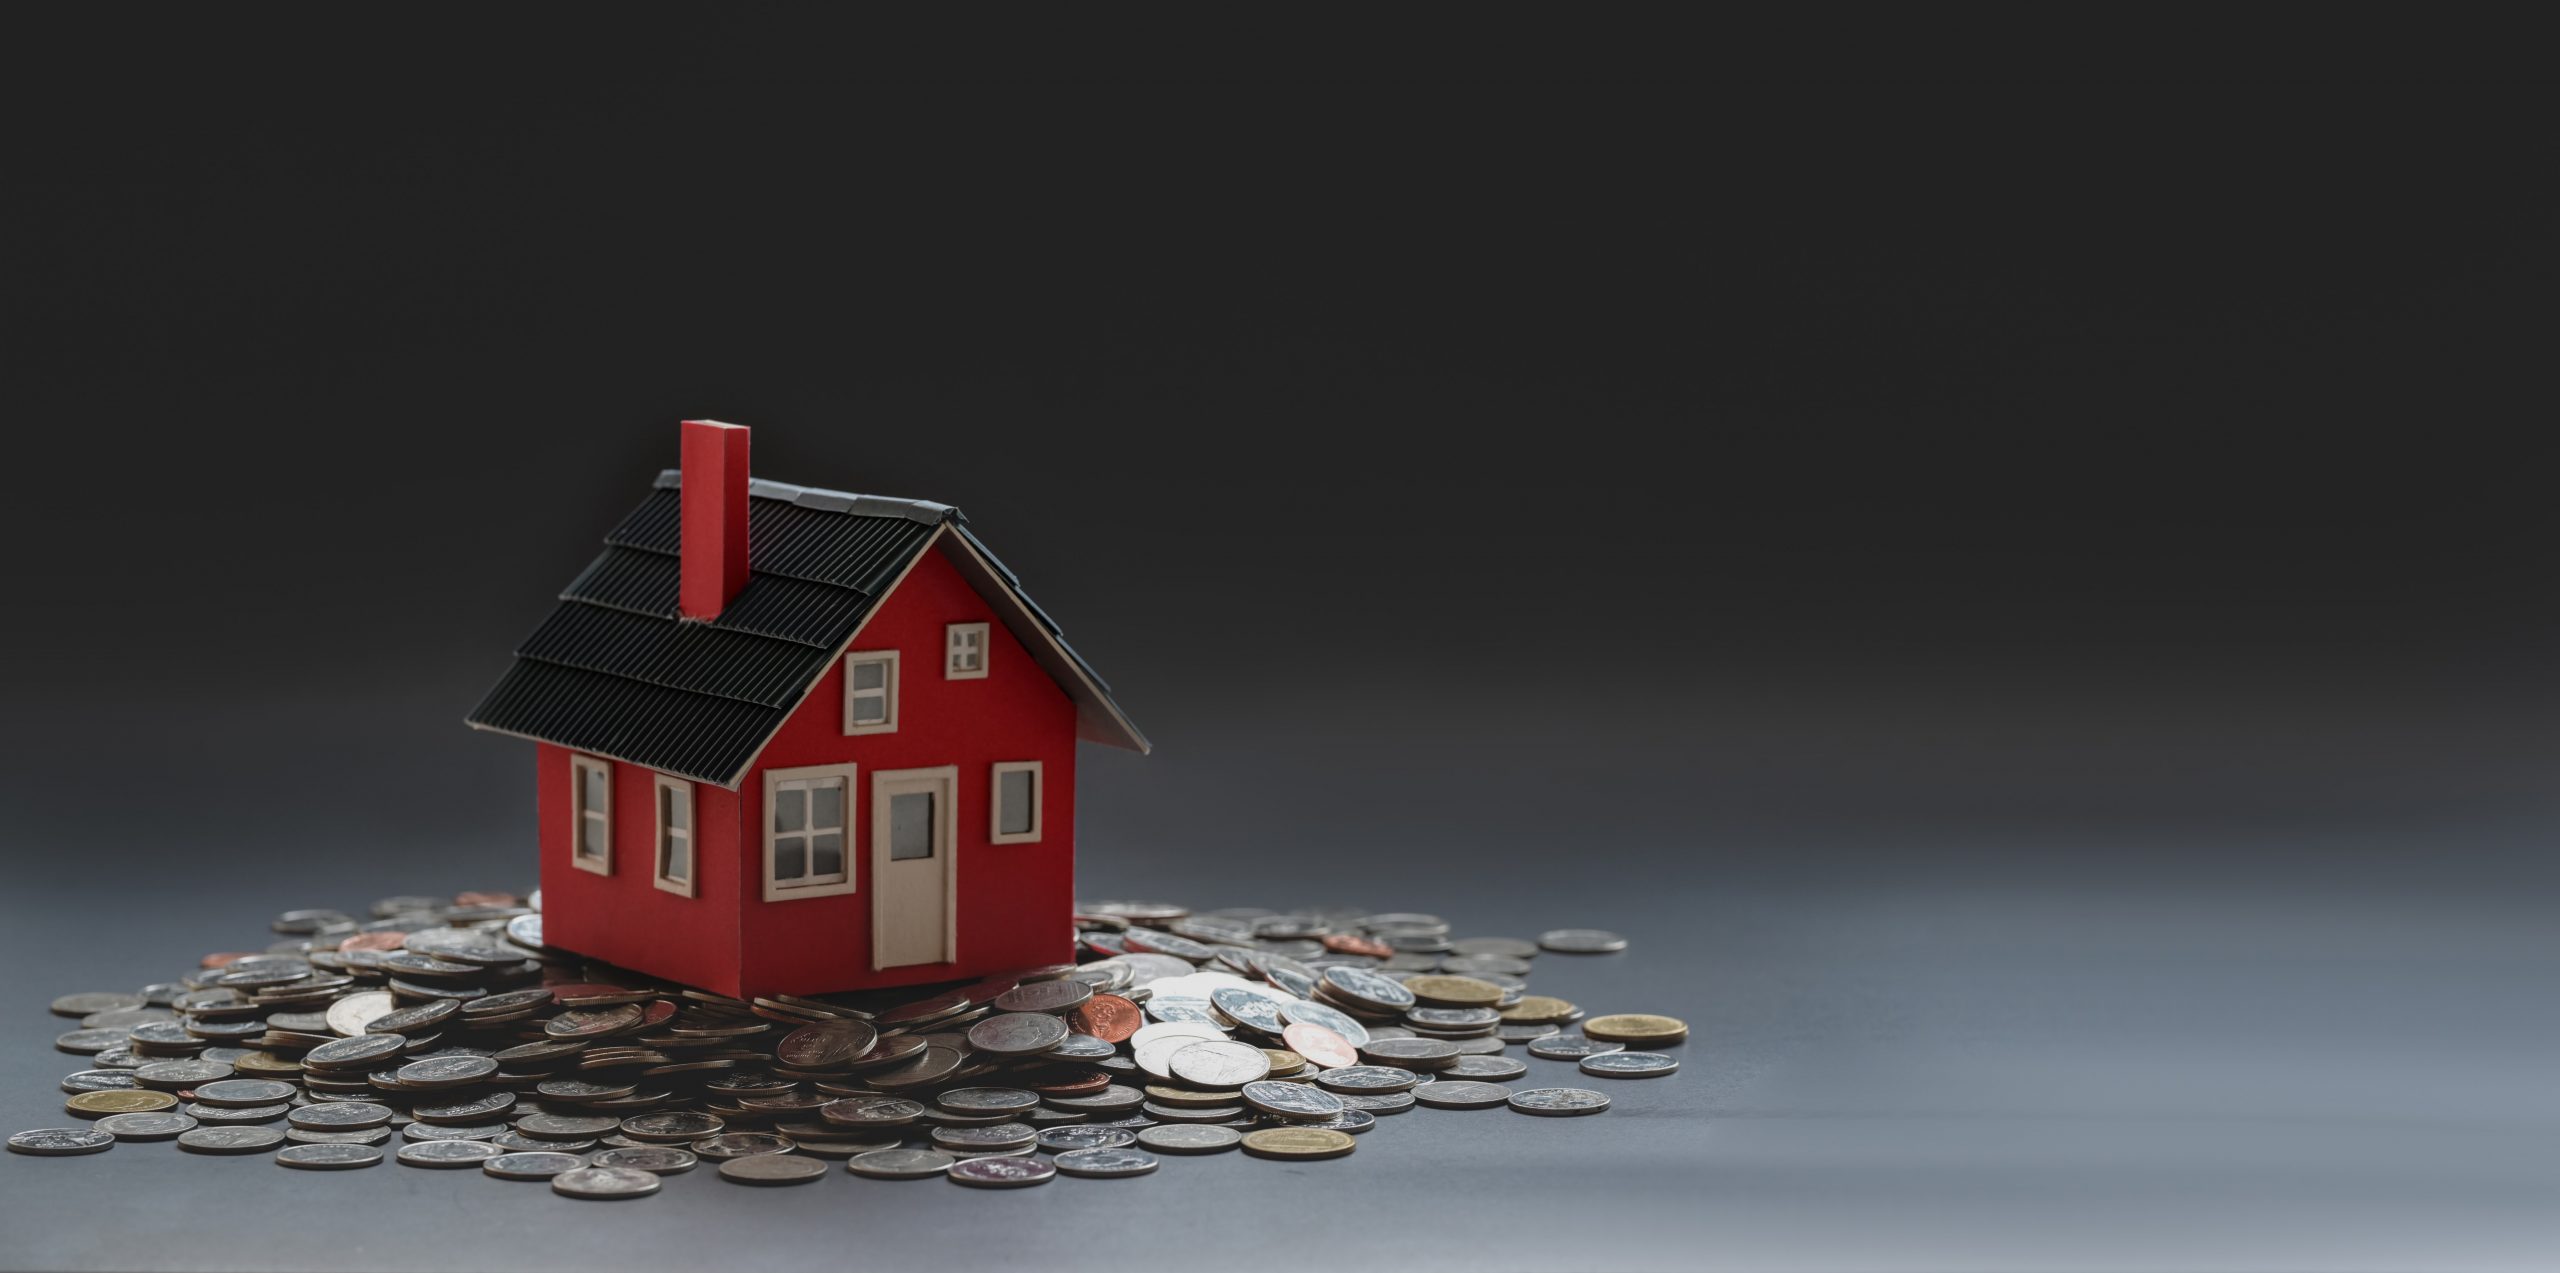 Miniature red house surrounded by coins on a gray background, amendment b.